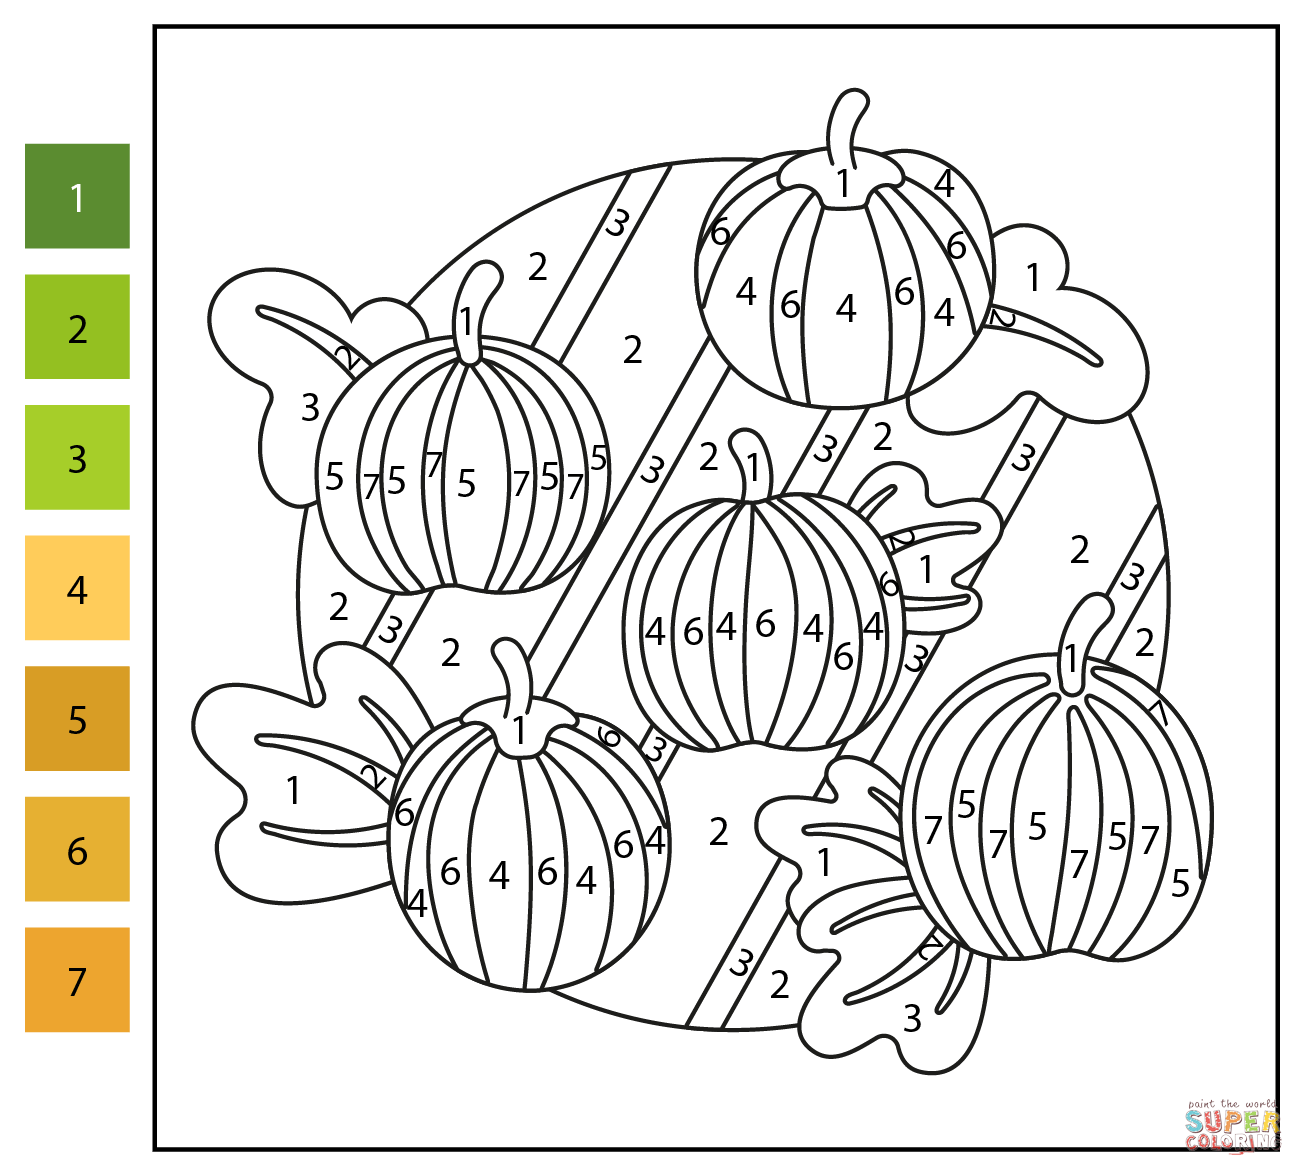 Pumpkin patch color by number free printable coloring pages